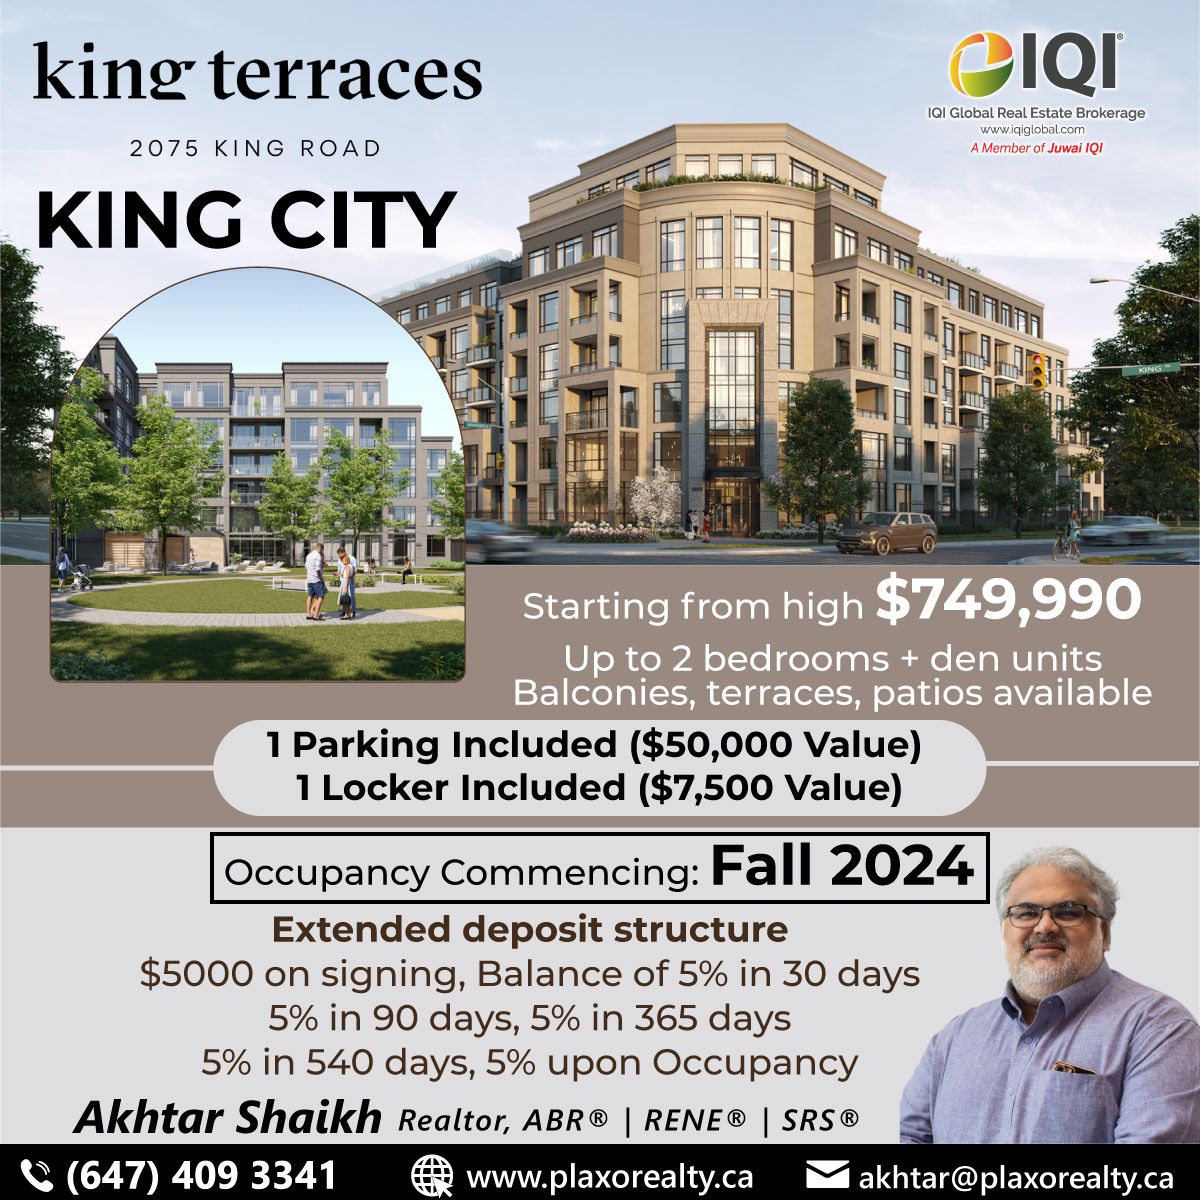 Luxury Condos in the heart of King City📍 . 
.
💰 Suite List Price $749,990
.
#akhtariqi #akhtarshaikh #FTHS #FTHB #firsttimehomebuyer #newhomeowner 
#KingCity #KingCitycondos #KingTerraces #KingCityON #ZancorHomes